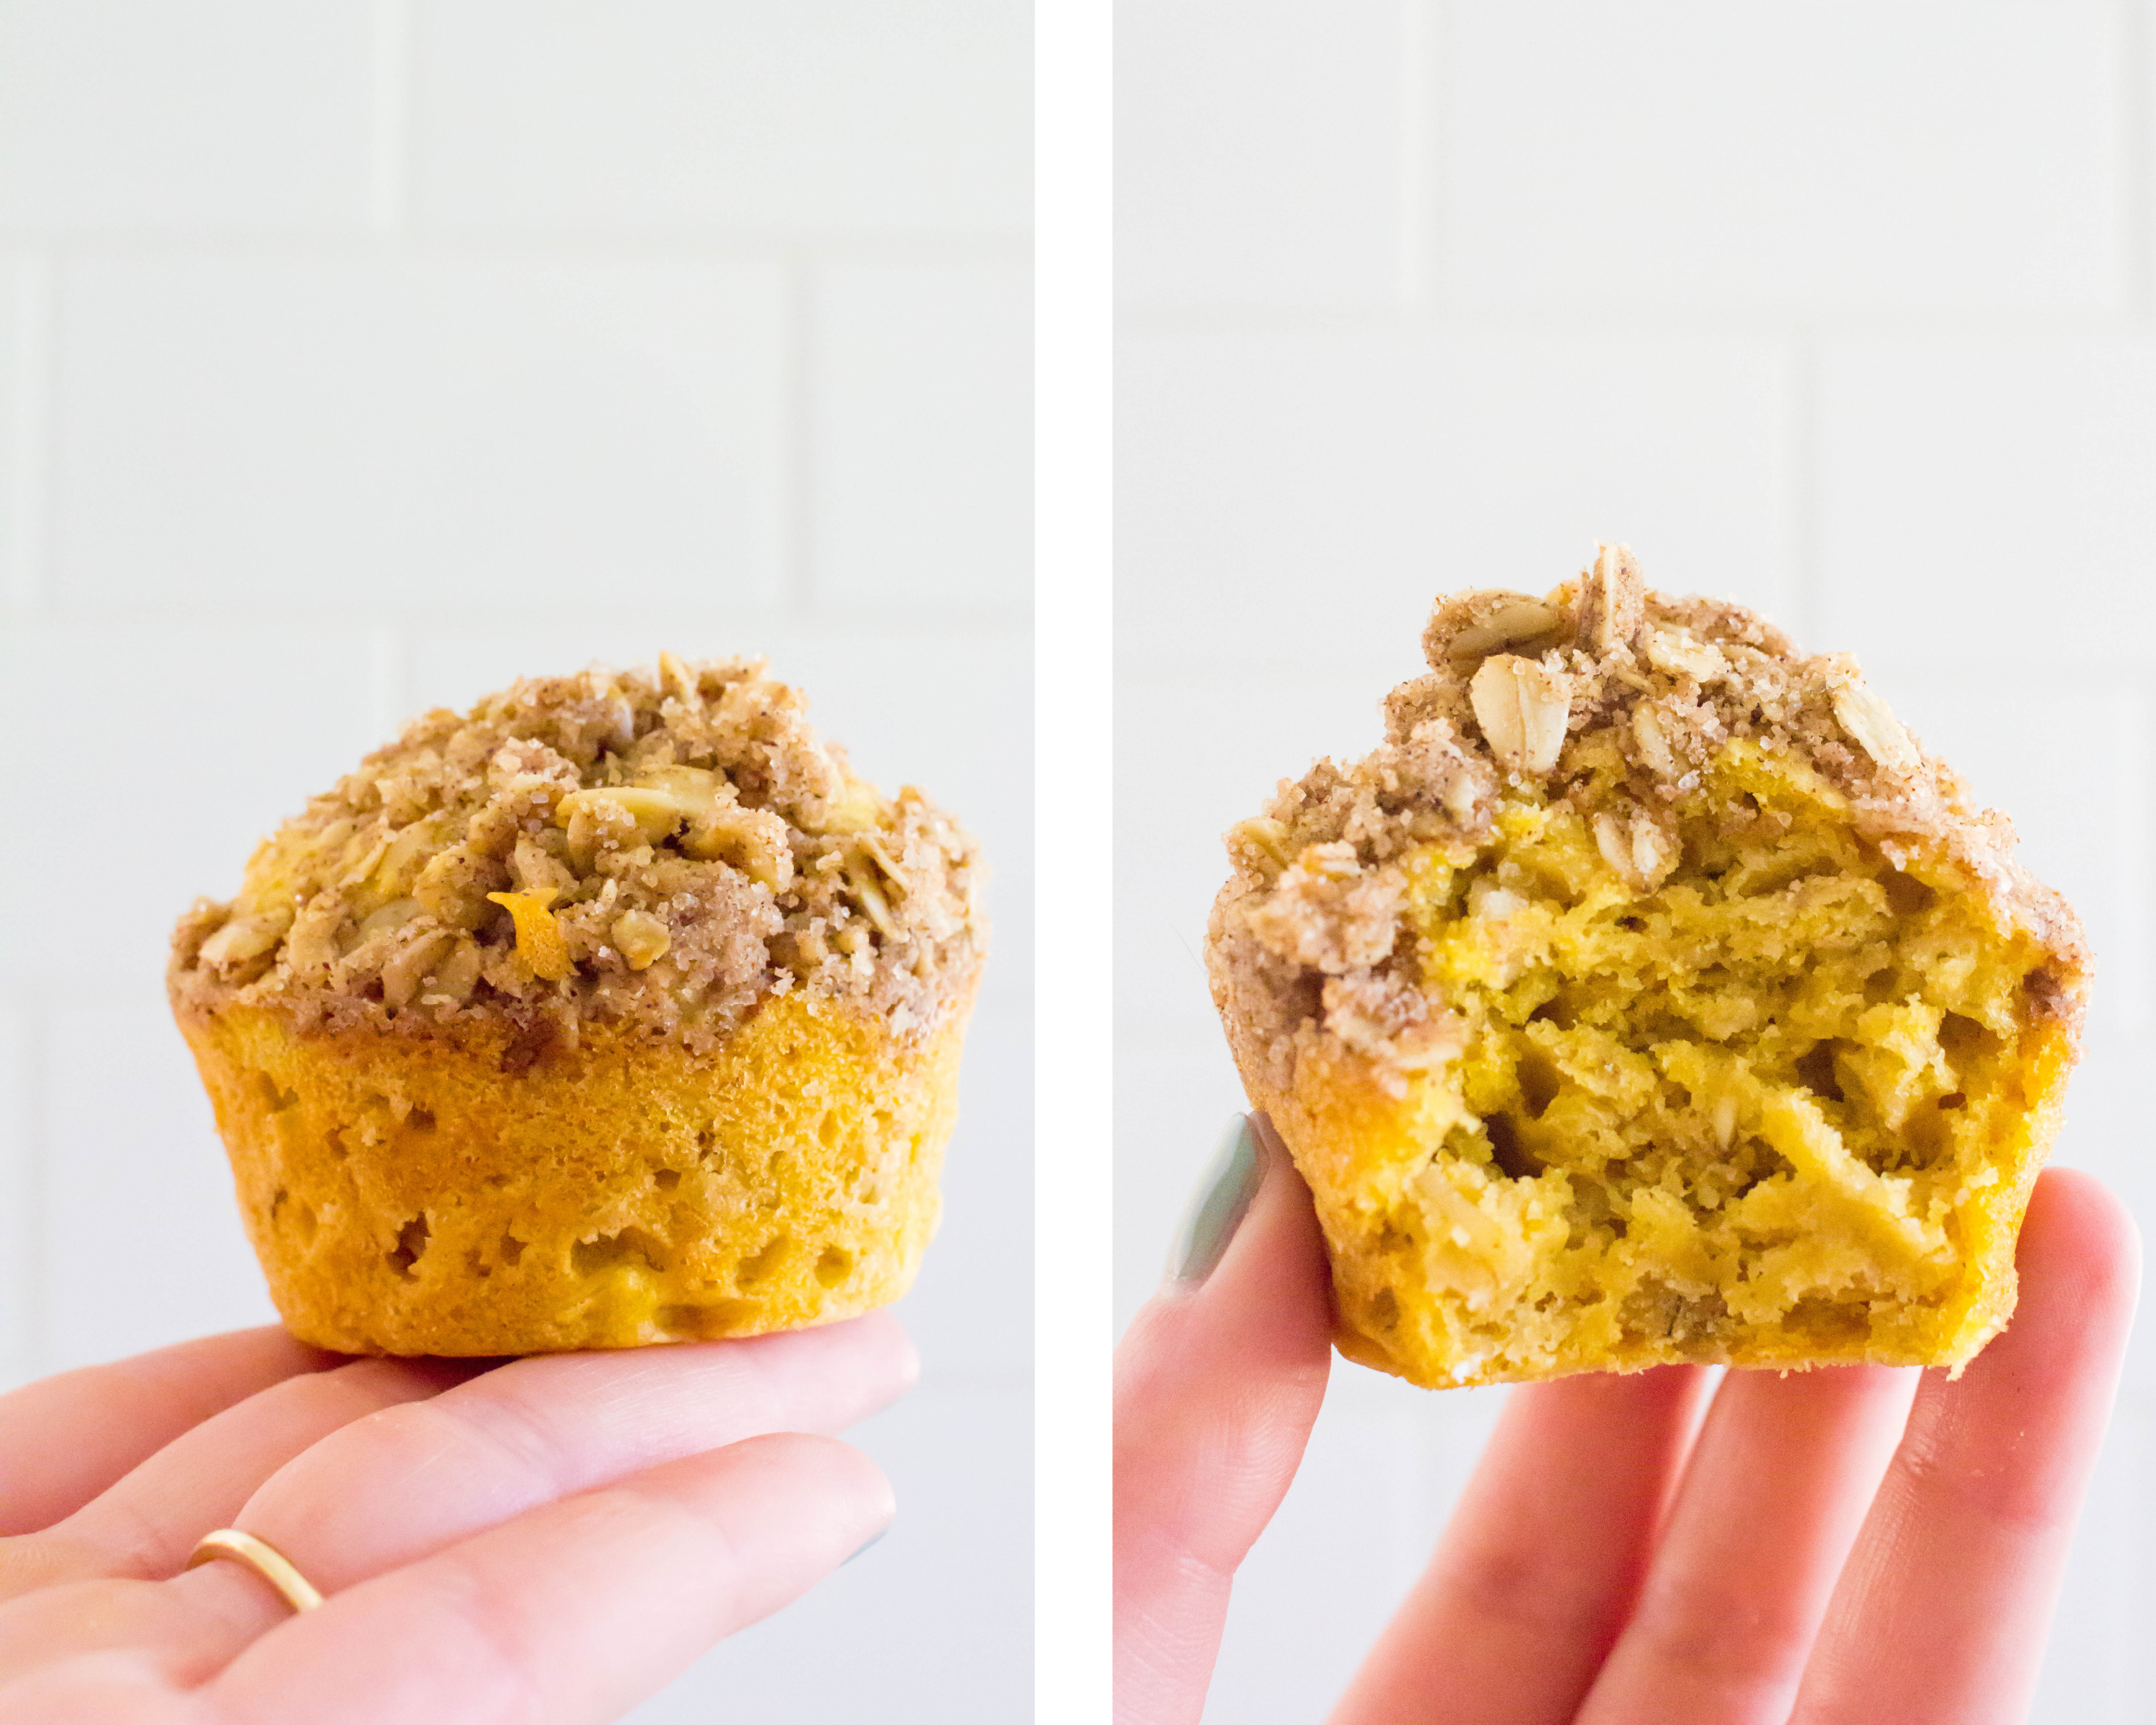 time for some fall baking!!! Pumpkin oatmeal muffins with snickerdoodle streusel | immaEATthat.com